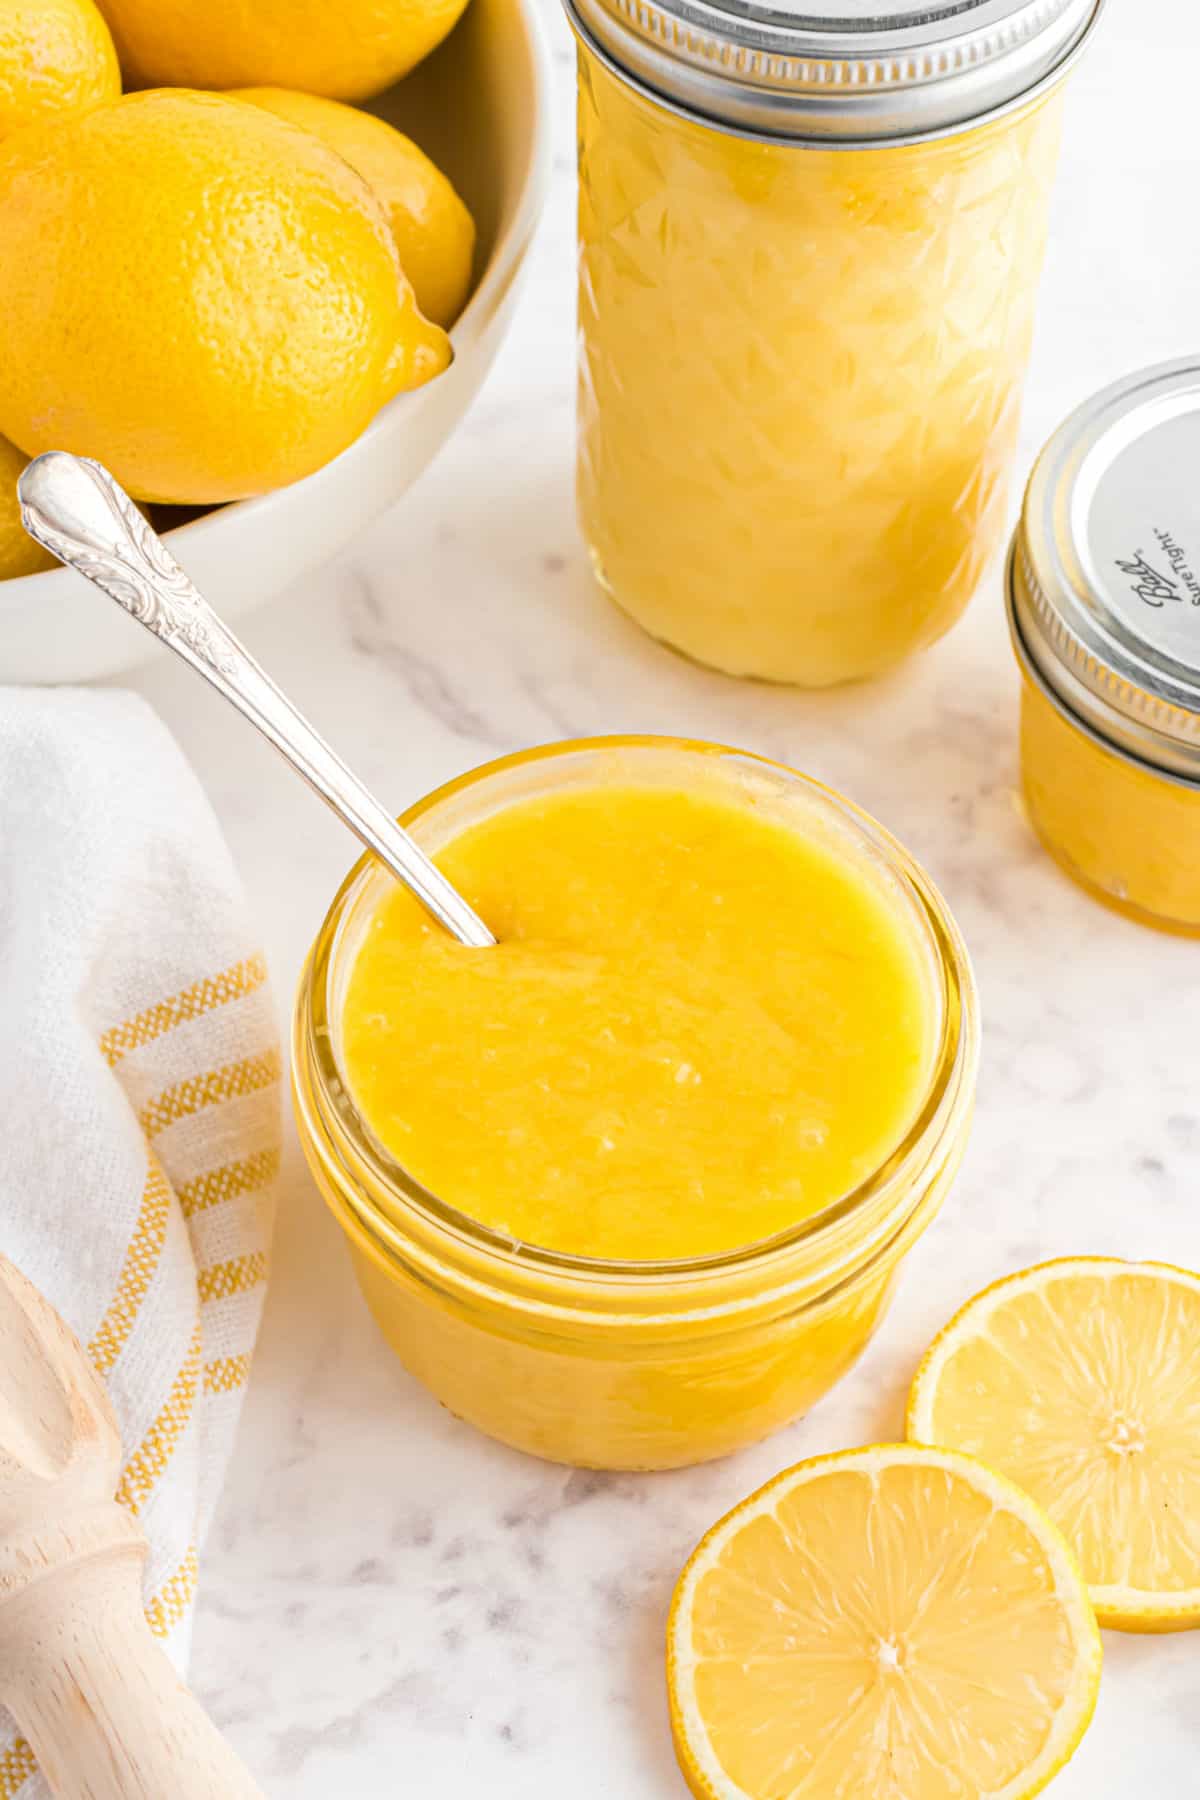 Homemade lemon curd in a small glass jar with a spoon.